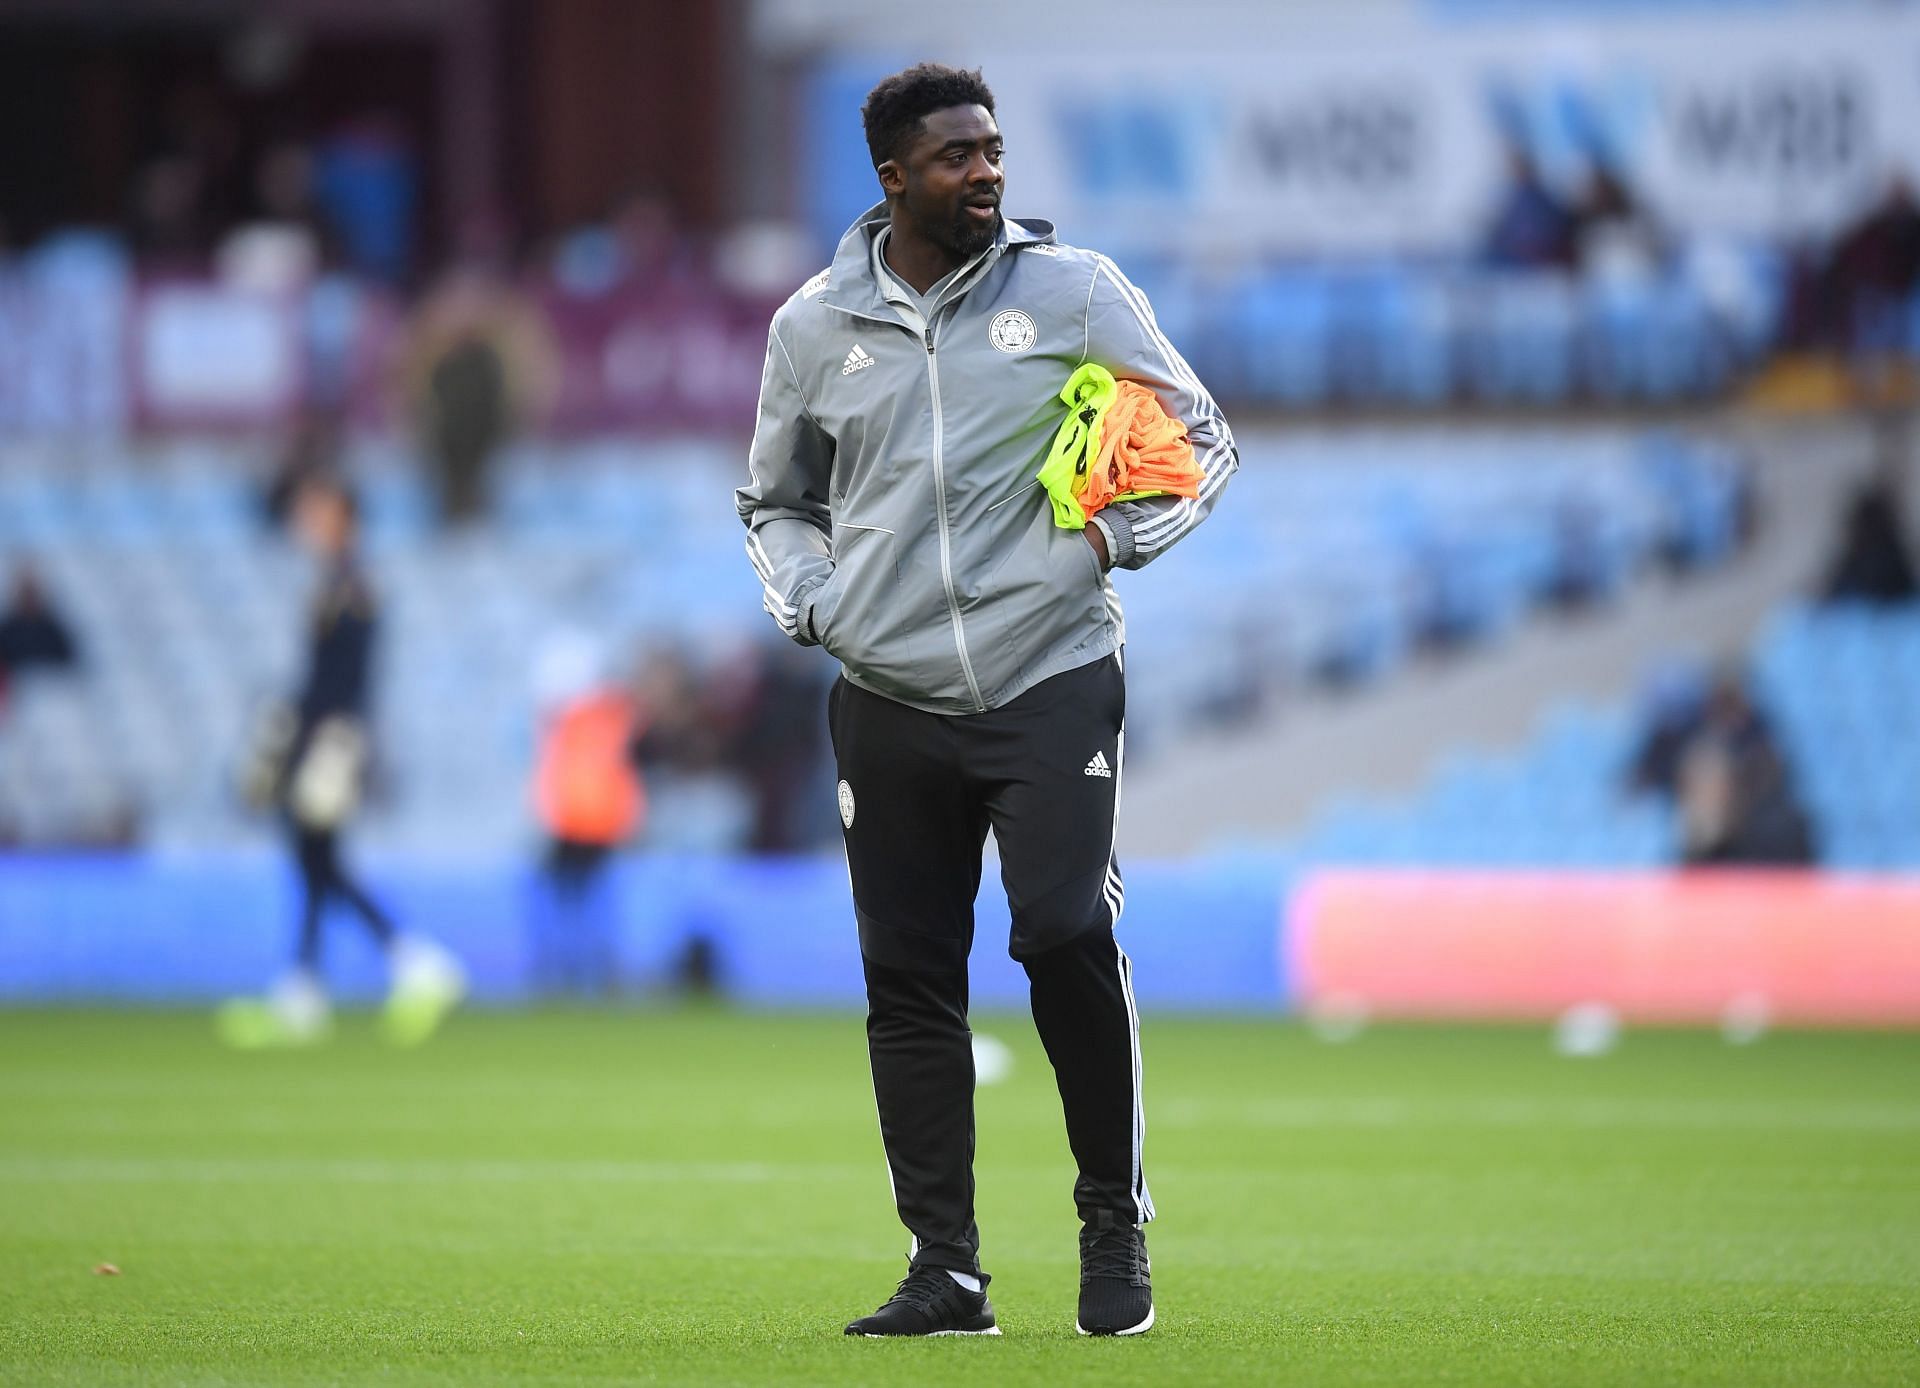 Kolo Toure is now the assistant coach of Leicester City.